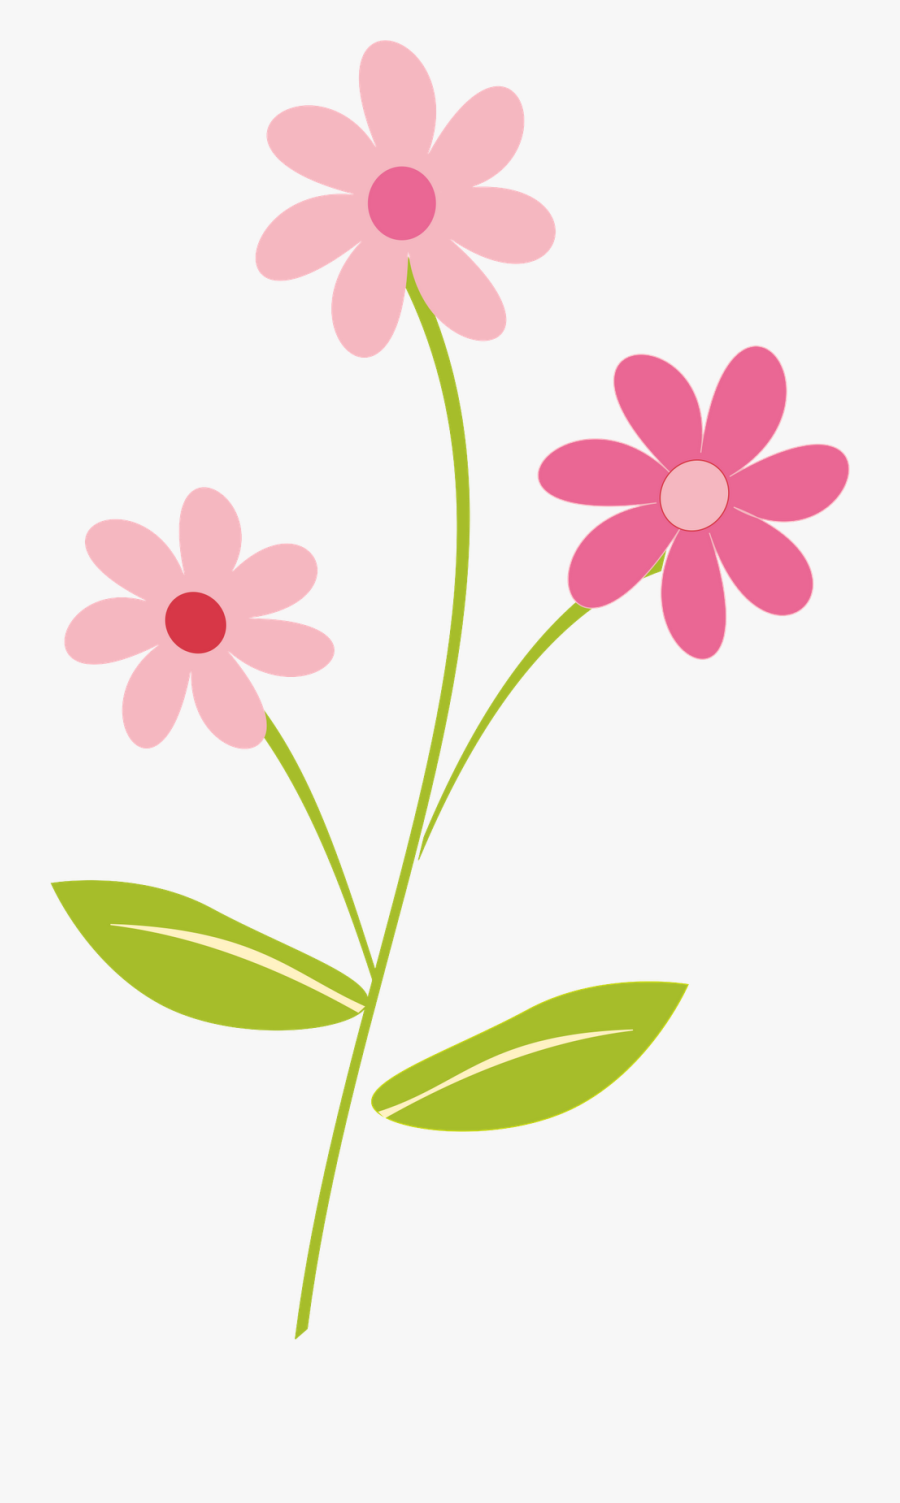 Clipart Of Pretty, Flower And Floral , Transparent - Flower Clipart Pretty, Transparent Clipart